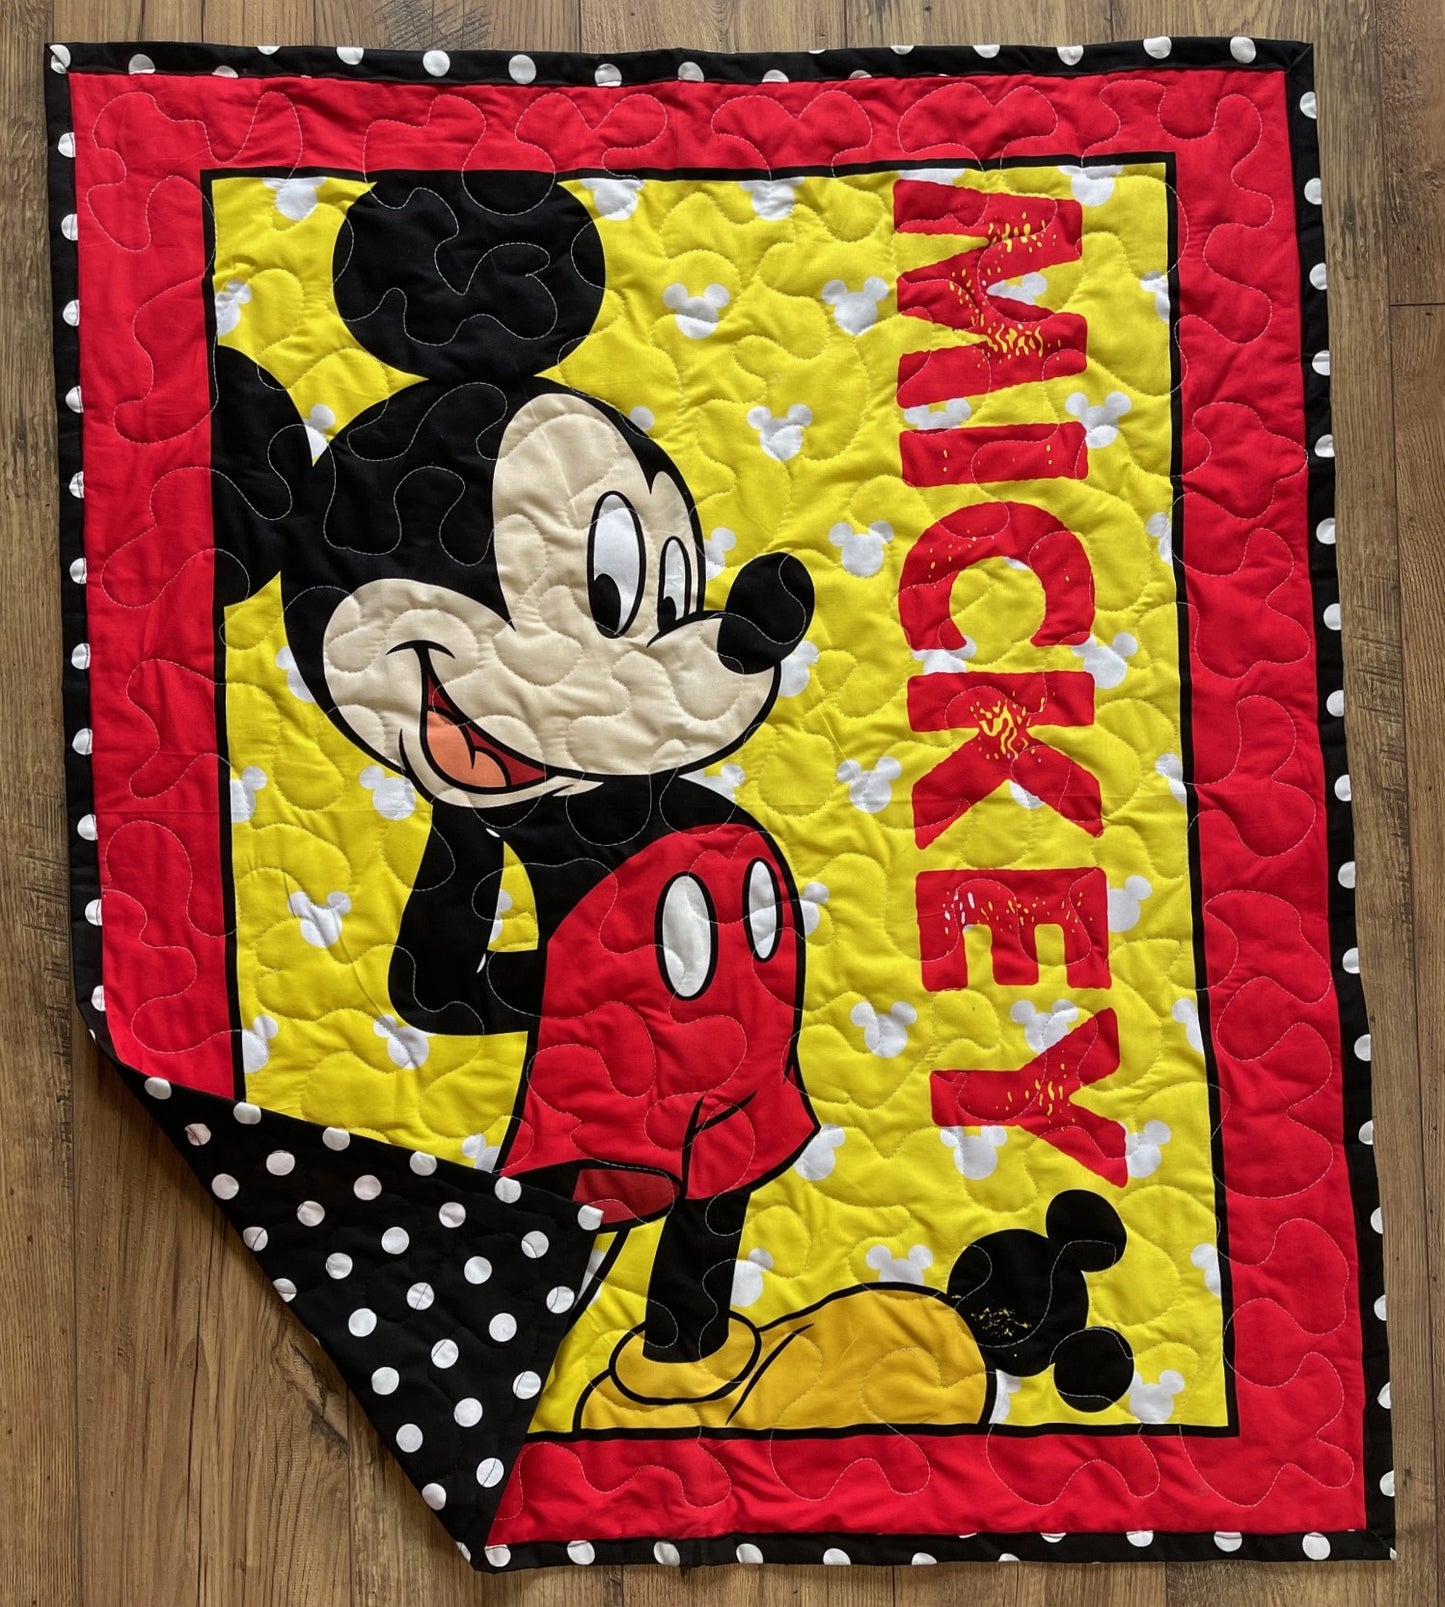 DISNEY CLASSIC INSPIRED MICKEY MOUSE 36"X44" QUILTED BLANKET